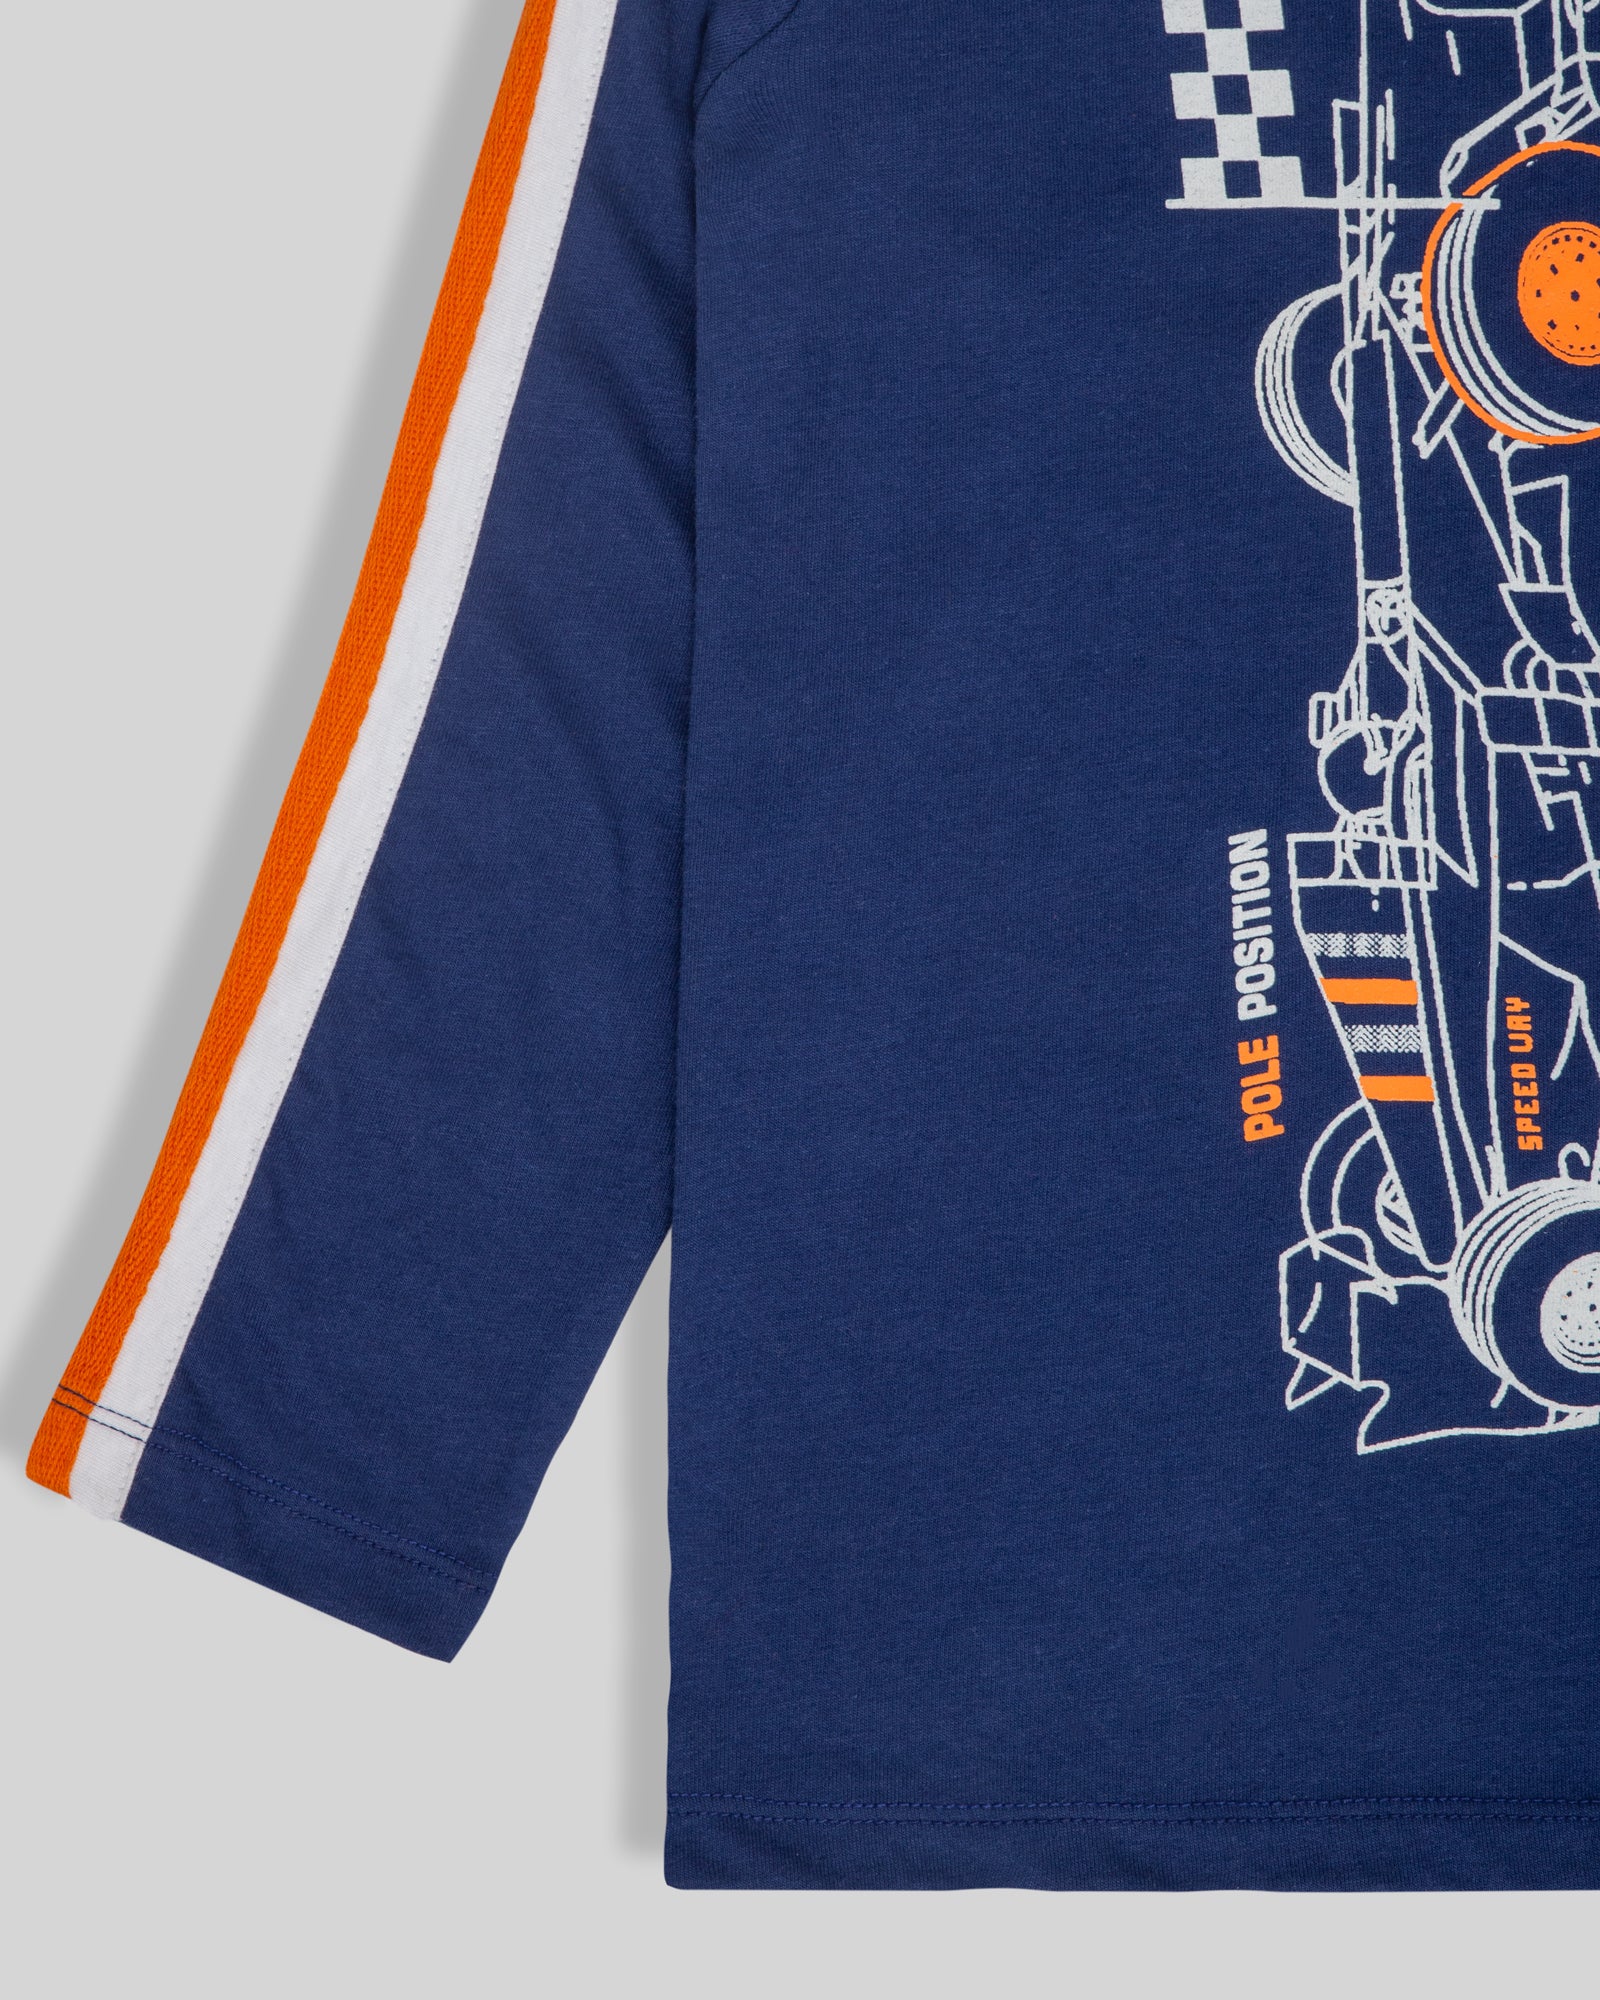 Formula 1 Graphic Tee Electric Blue